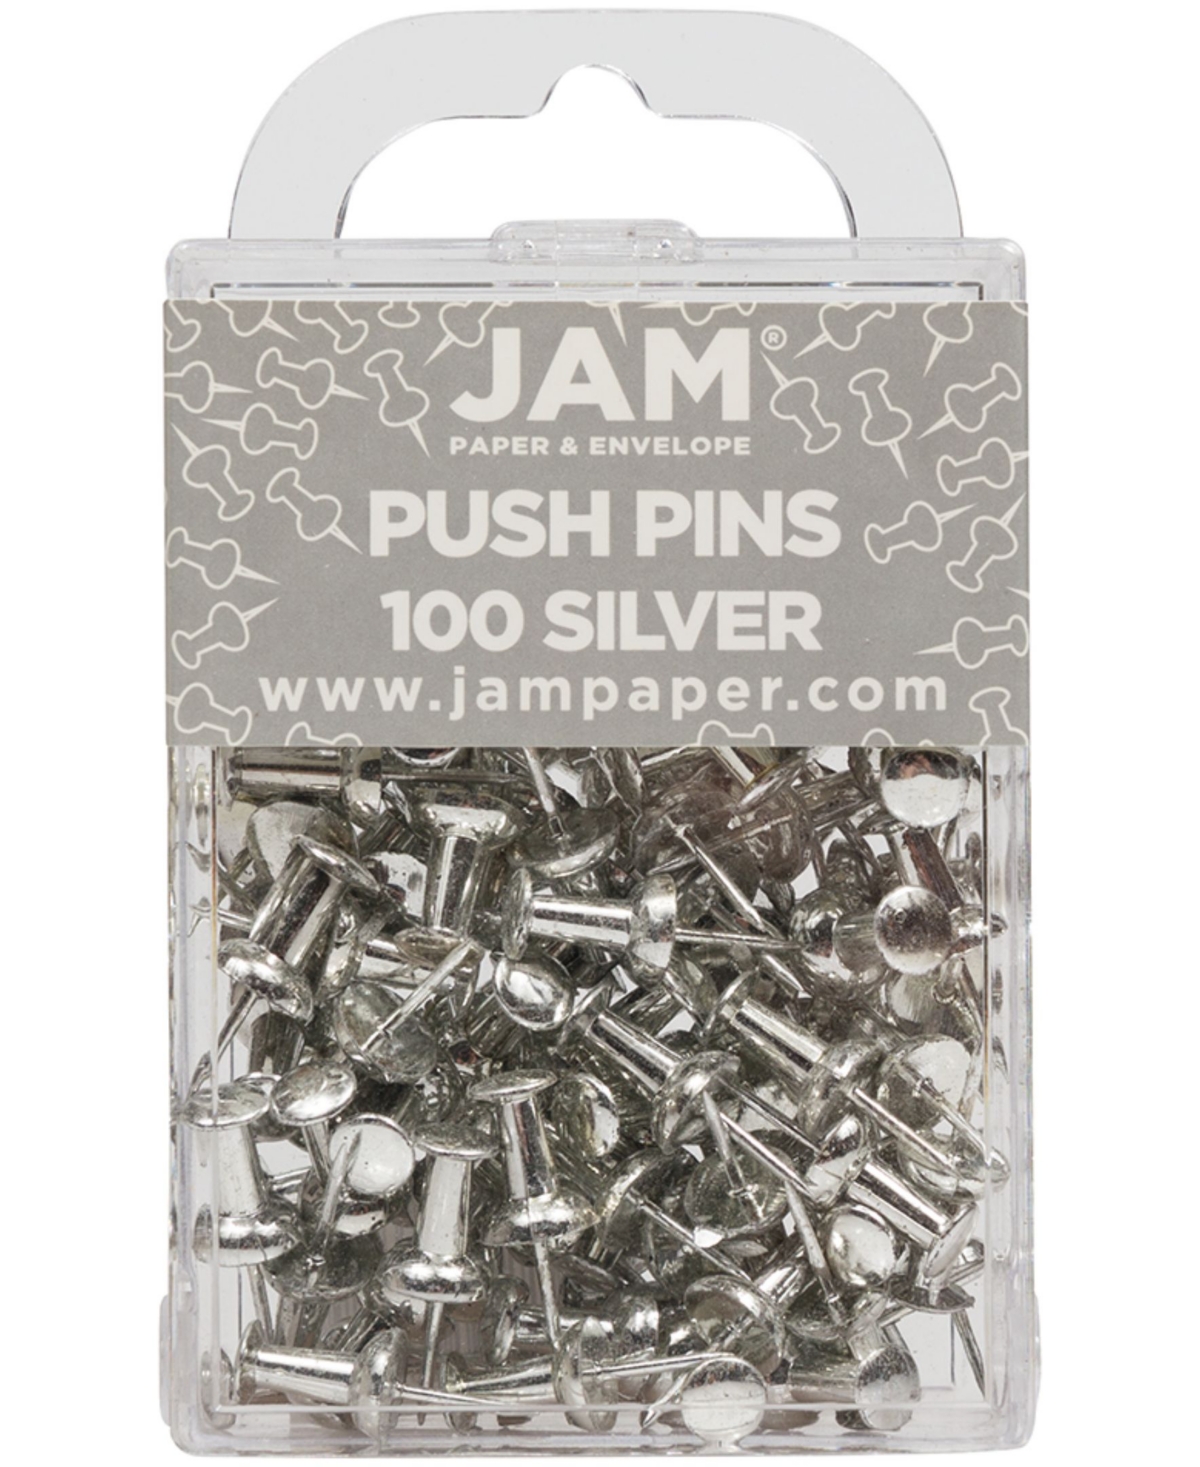 Jam Paper Colorful Push Pins In Silver